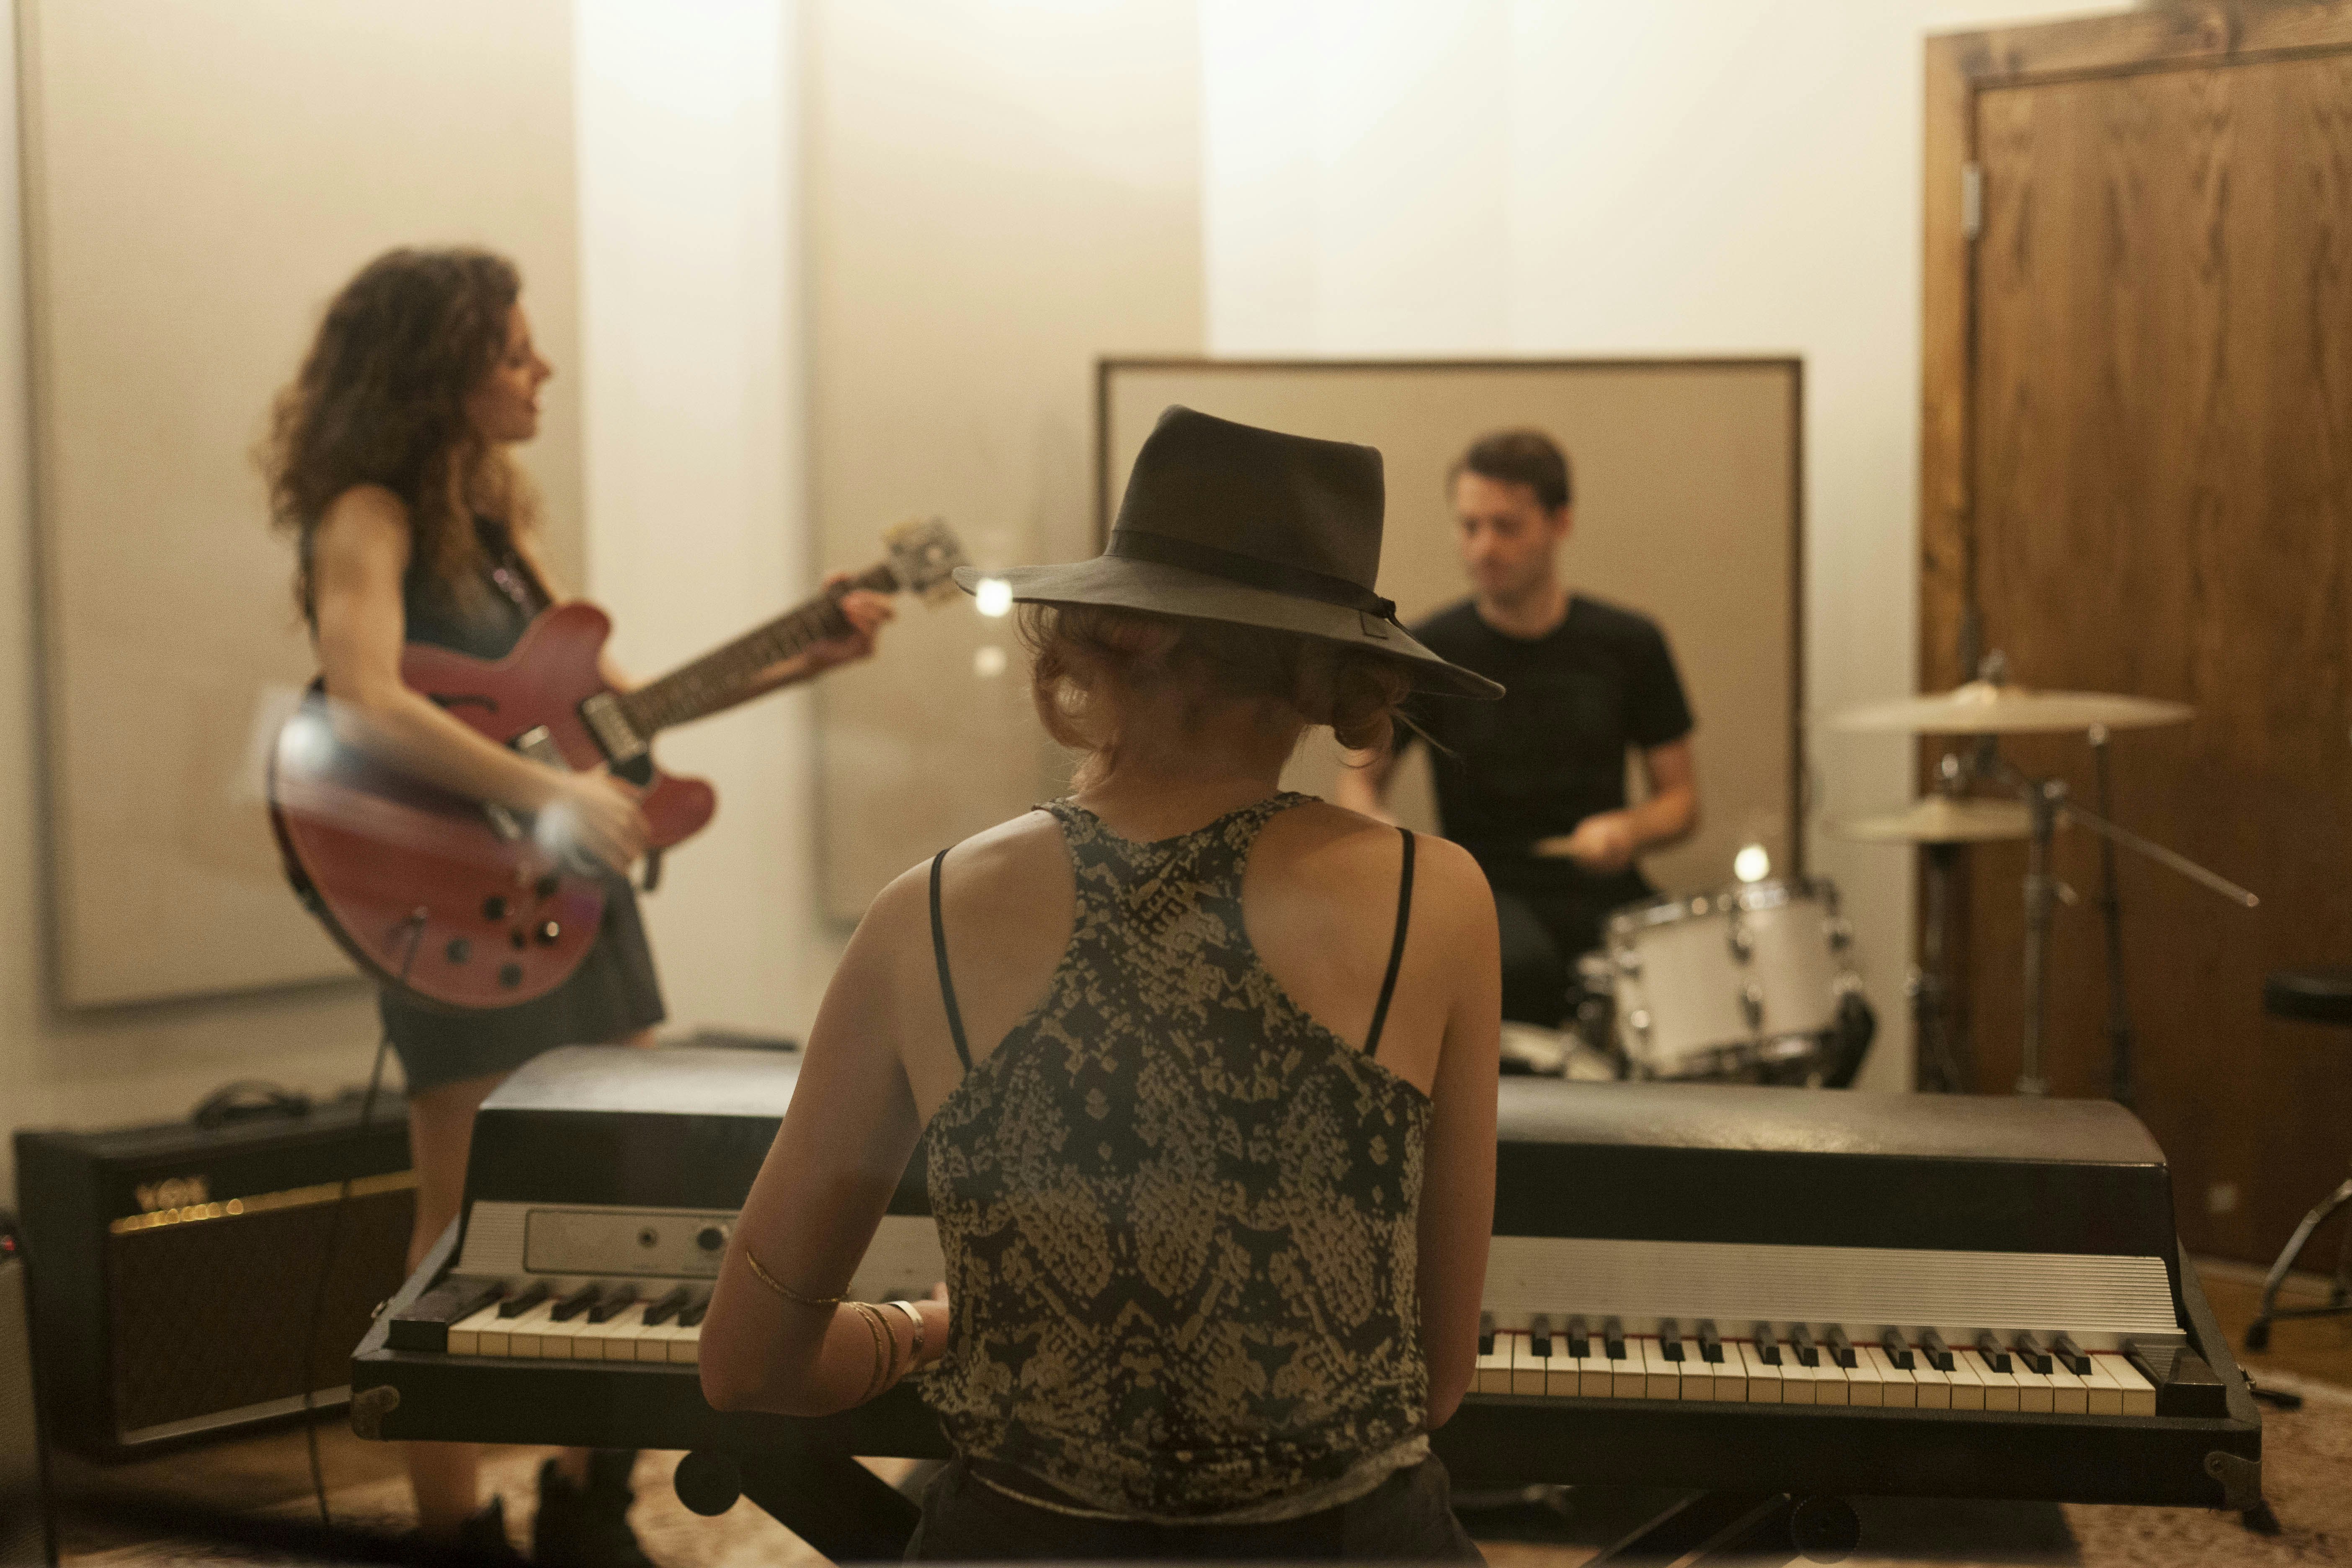 Musicians playing. A woman playing the piano has her back to the camera. To her left a woman is playing the guitar and in front of her is a man playing the drums 